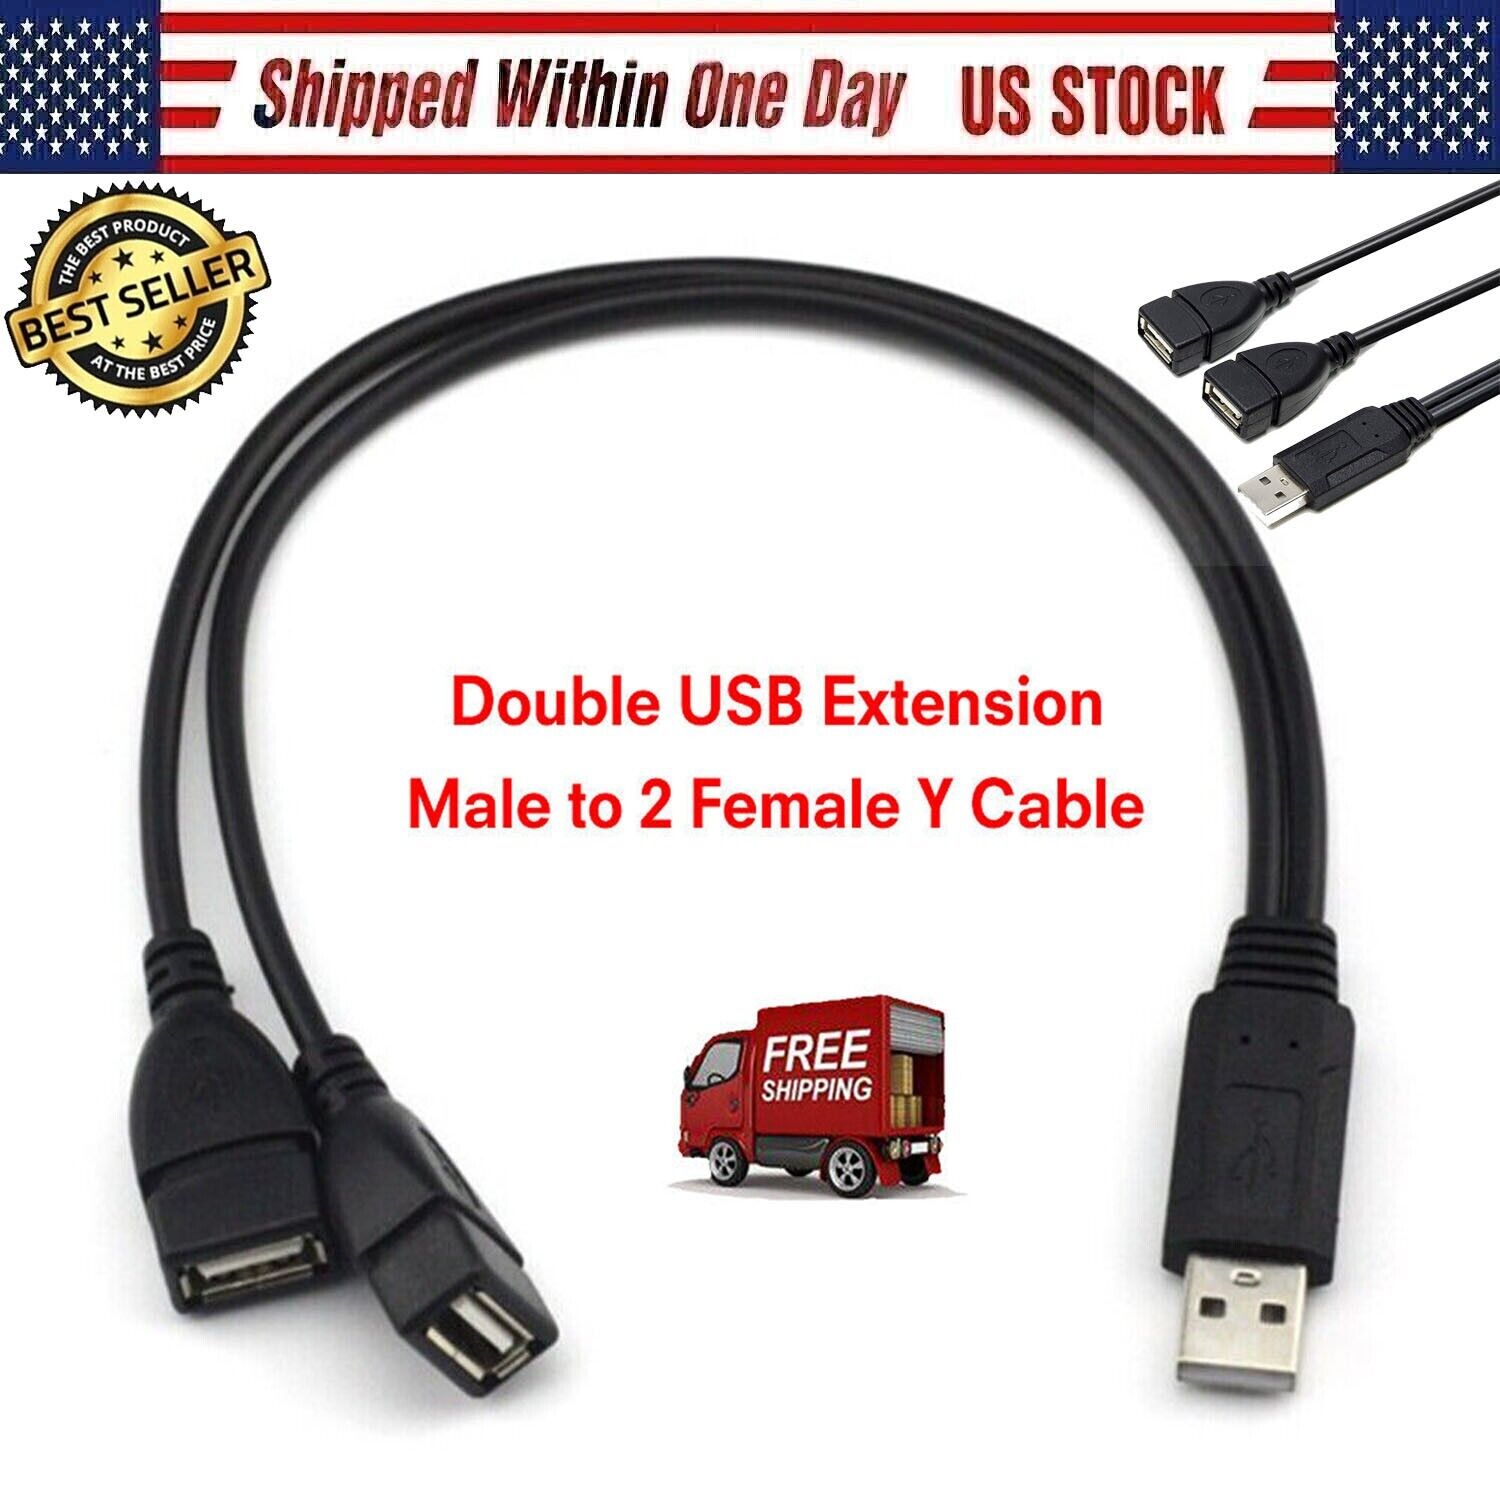 2x USB 2.0 Ports Jack Y Splitter Hub Power Cord Adapter Male To 2 Female Cable